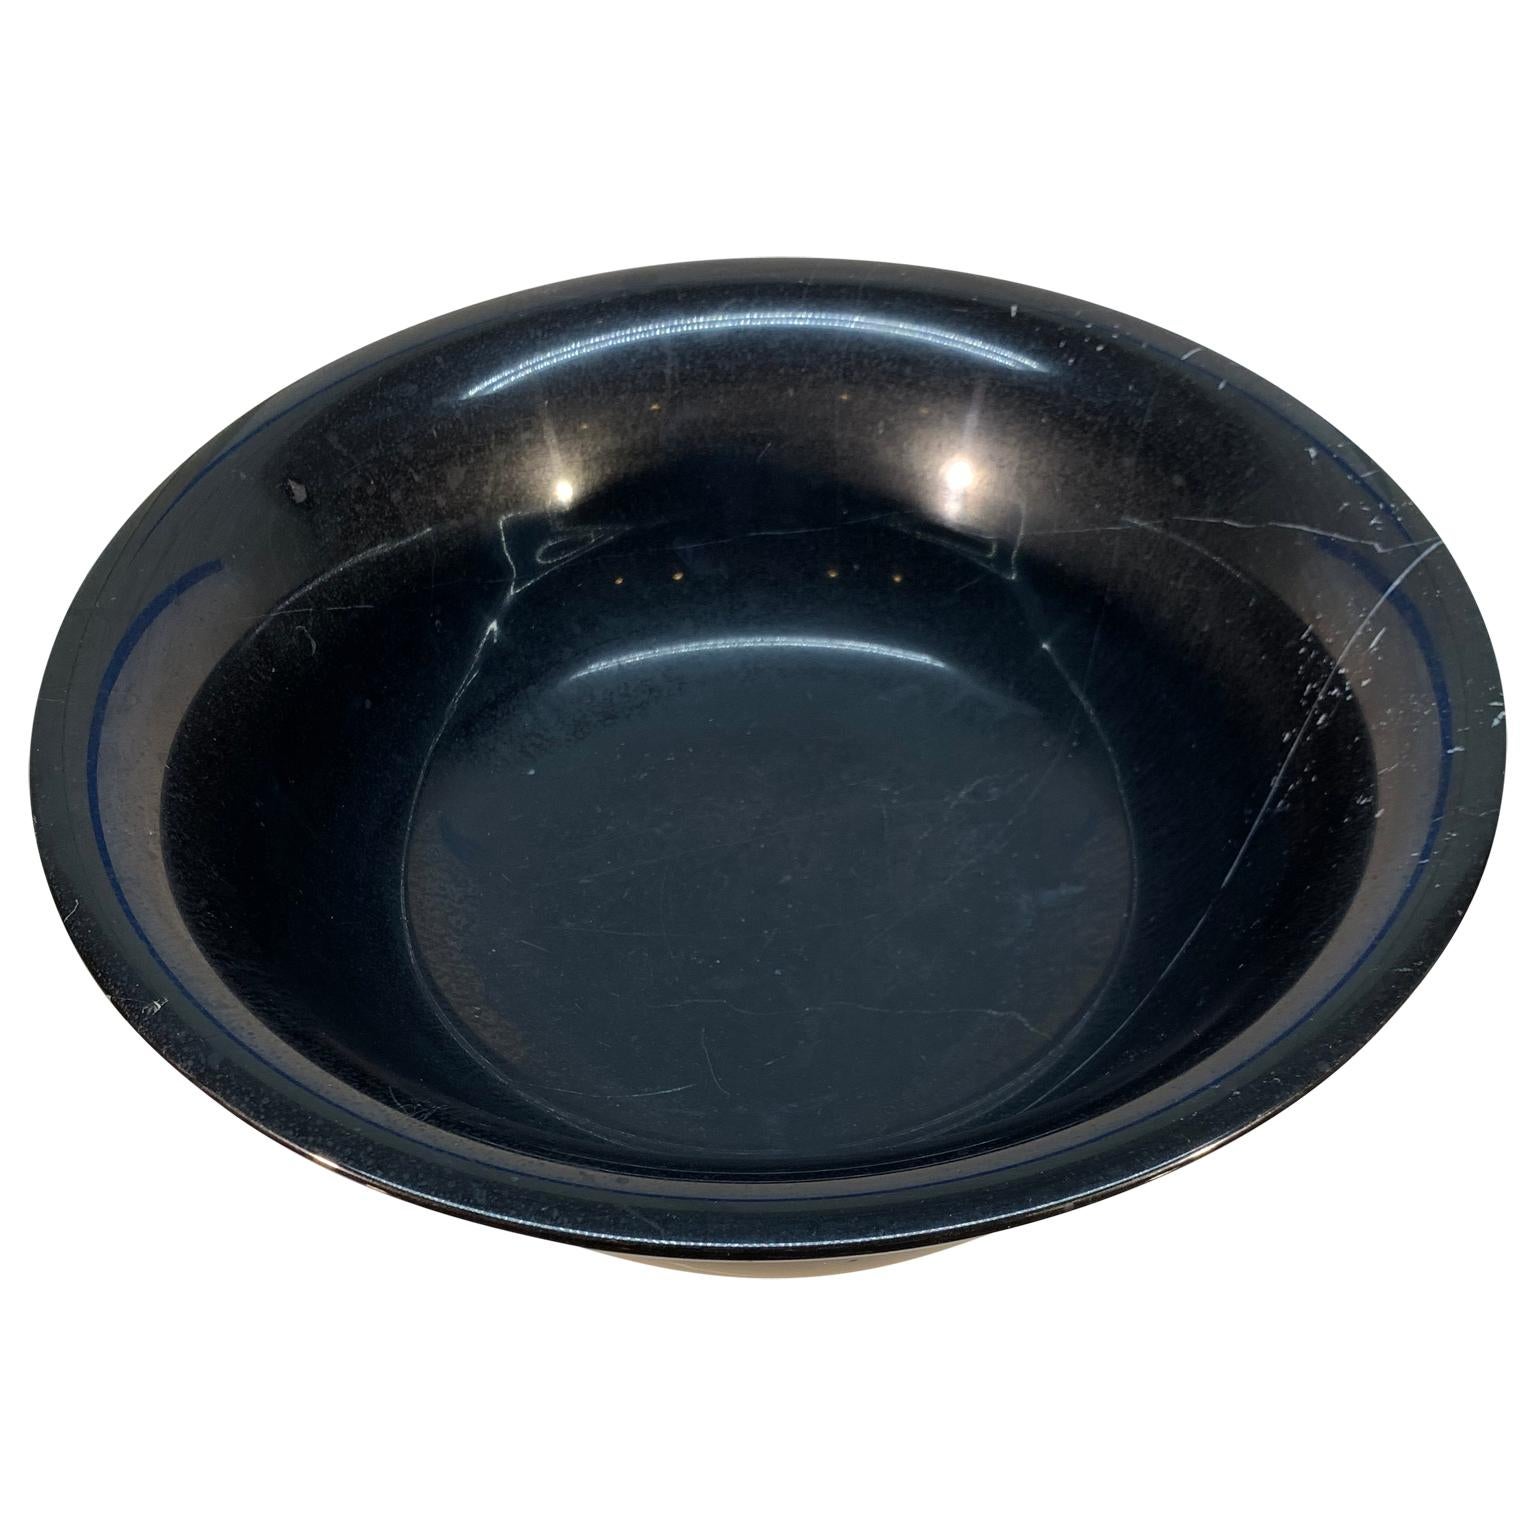 Black solid marble bowl centerpiece.